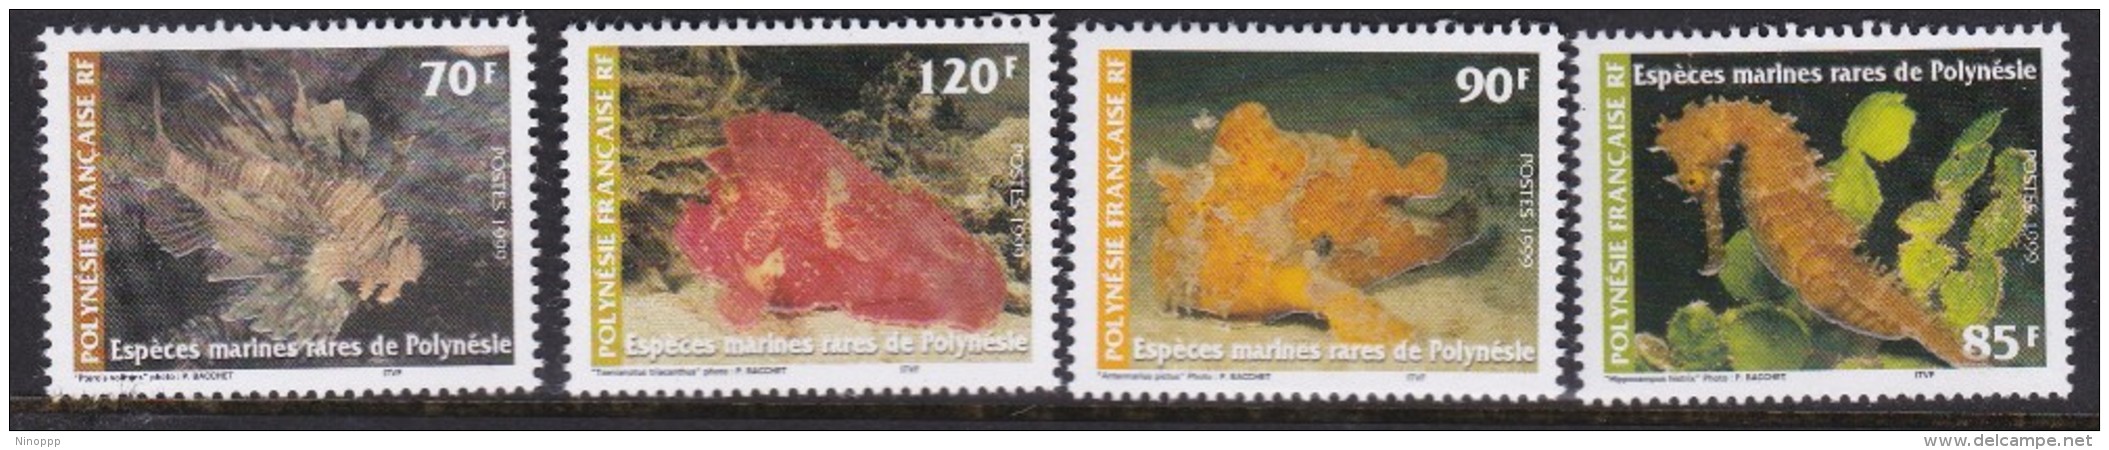 French Polynesia SG 841-44 1999 Rare Marine Species MNH - Unused Stamps